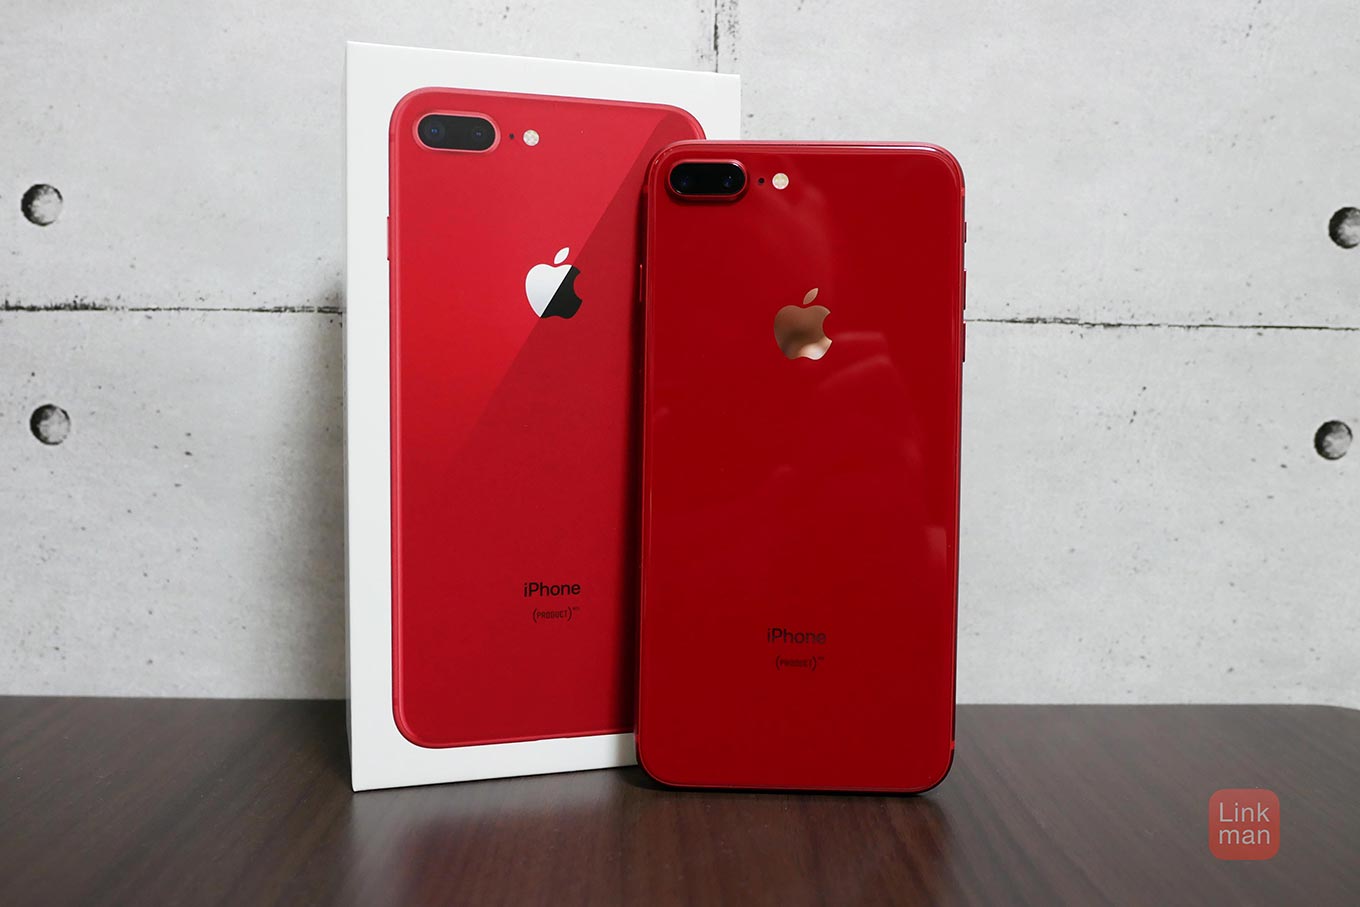 Iphone8plusproductred 01